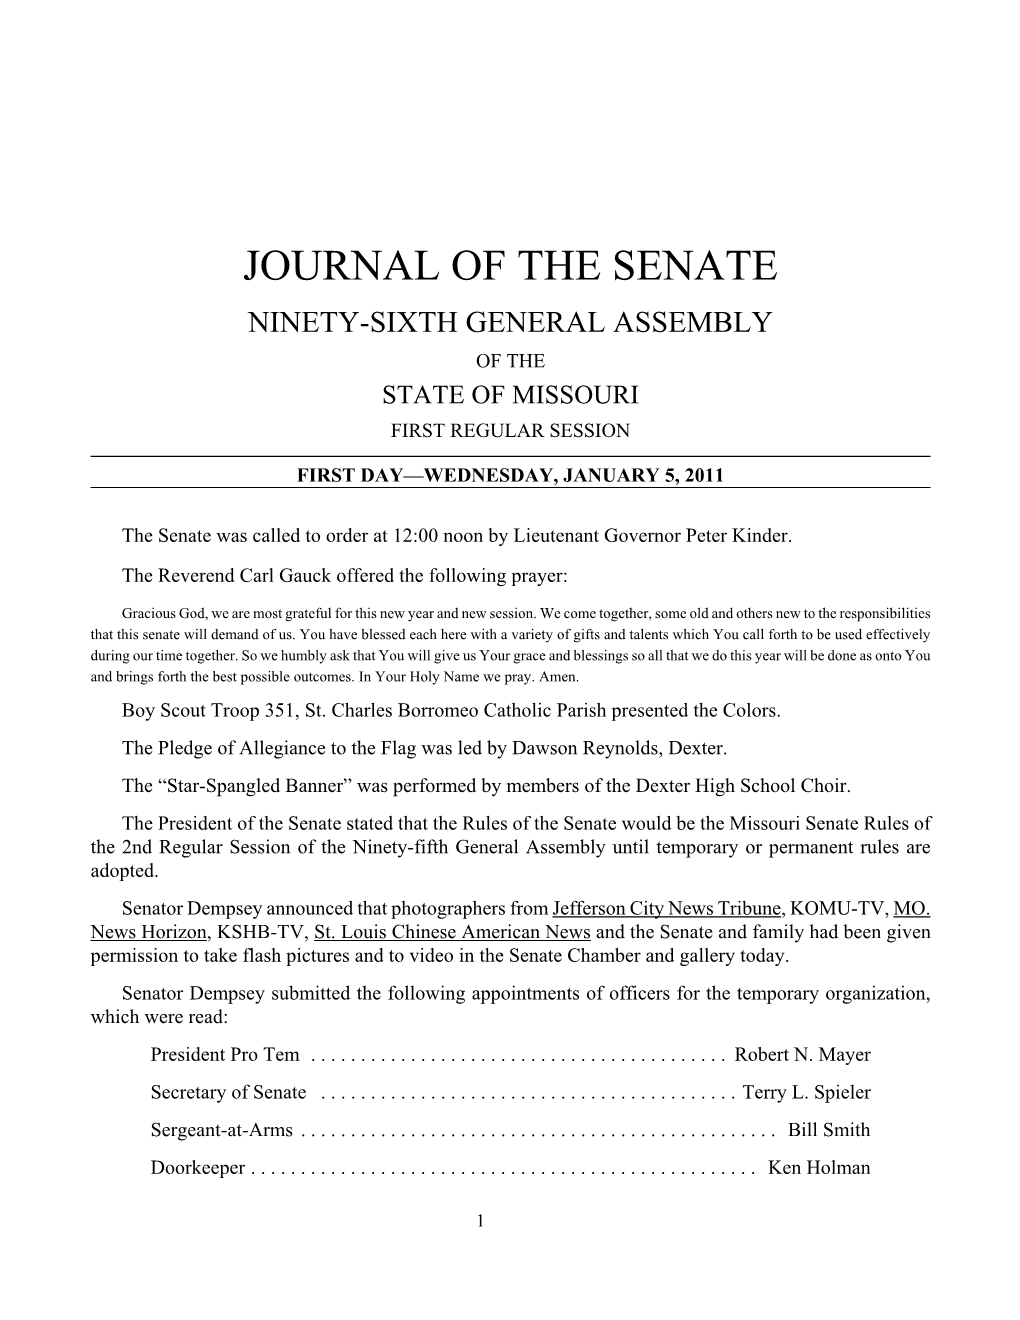 Journal of the Senate Ninety-Sixth General Assembly of the State of Missouri First Regular Session